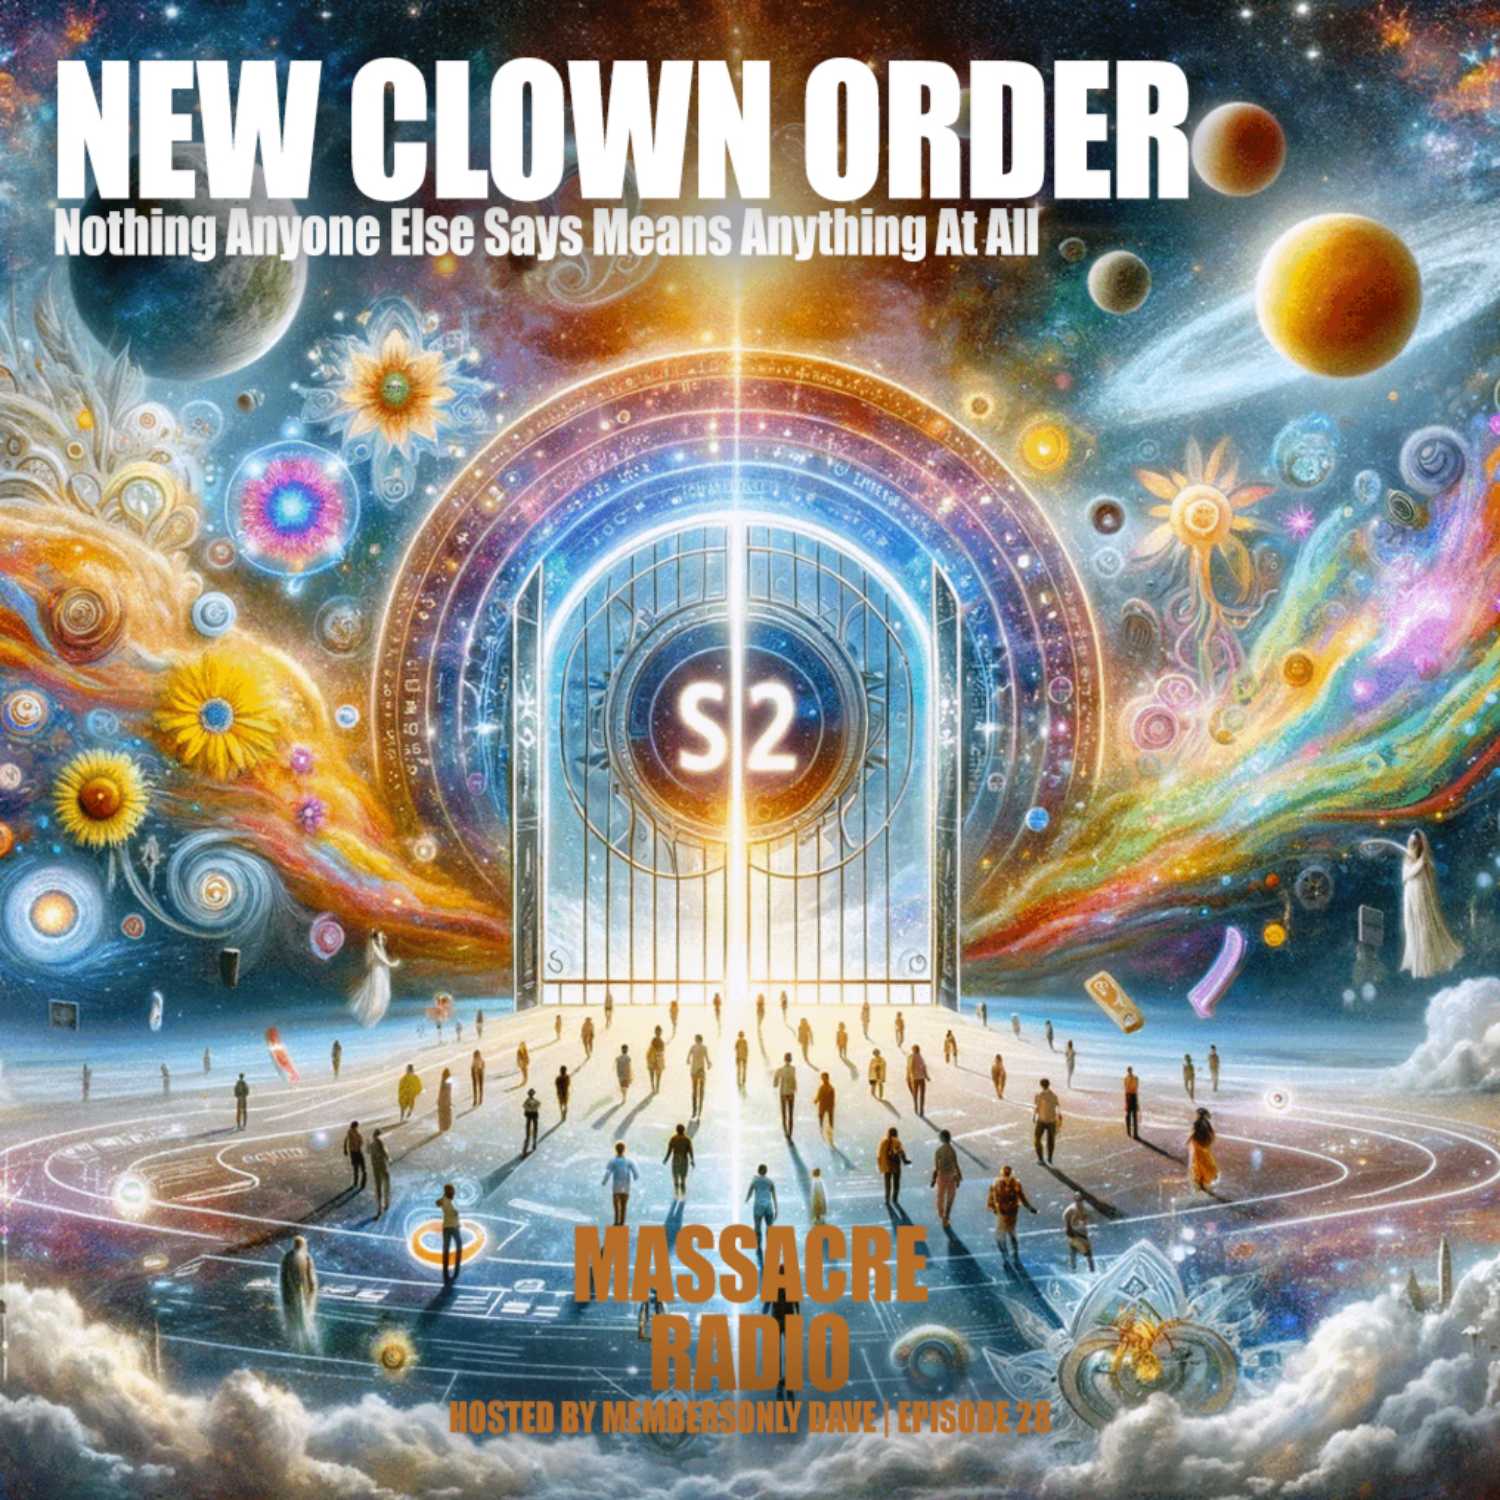 New Clown Order - Nothing Anyone Else Says Means Anything At All Ep. 28